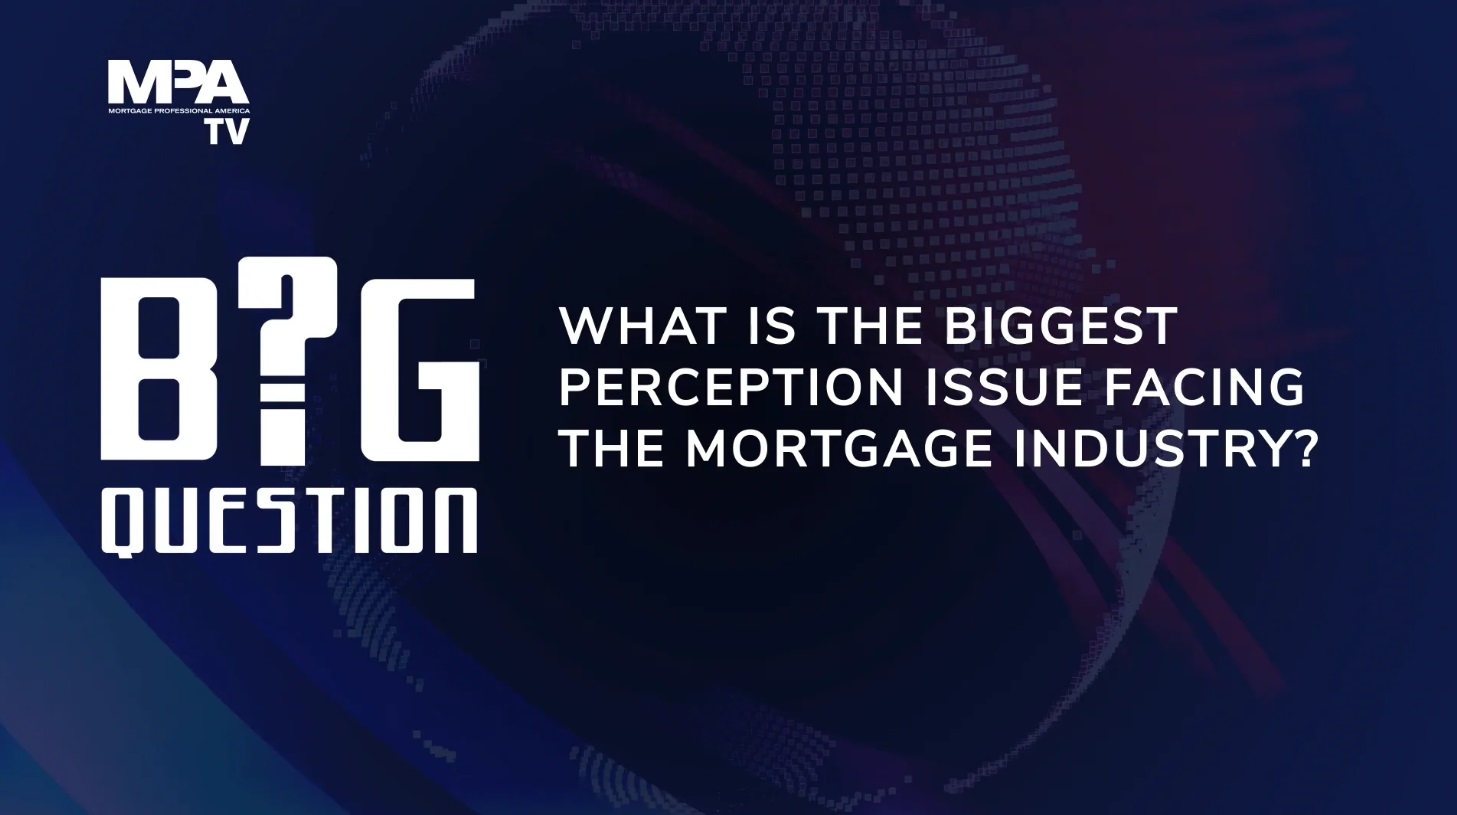 What is the biggest perception issue facing the mortgage industry?